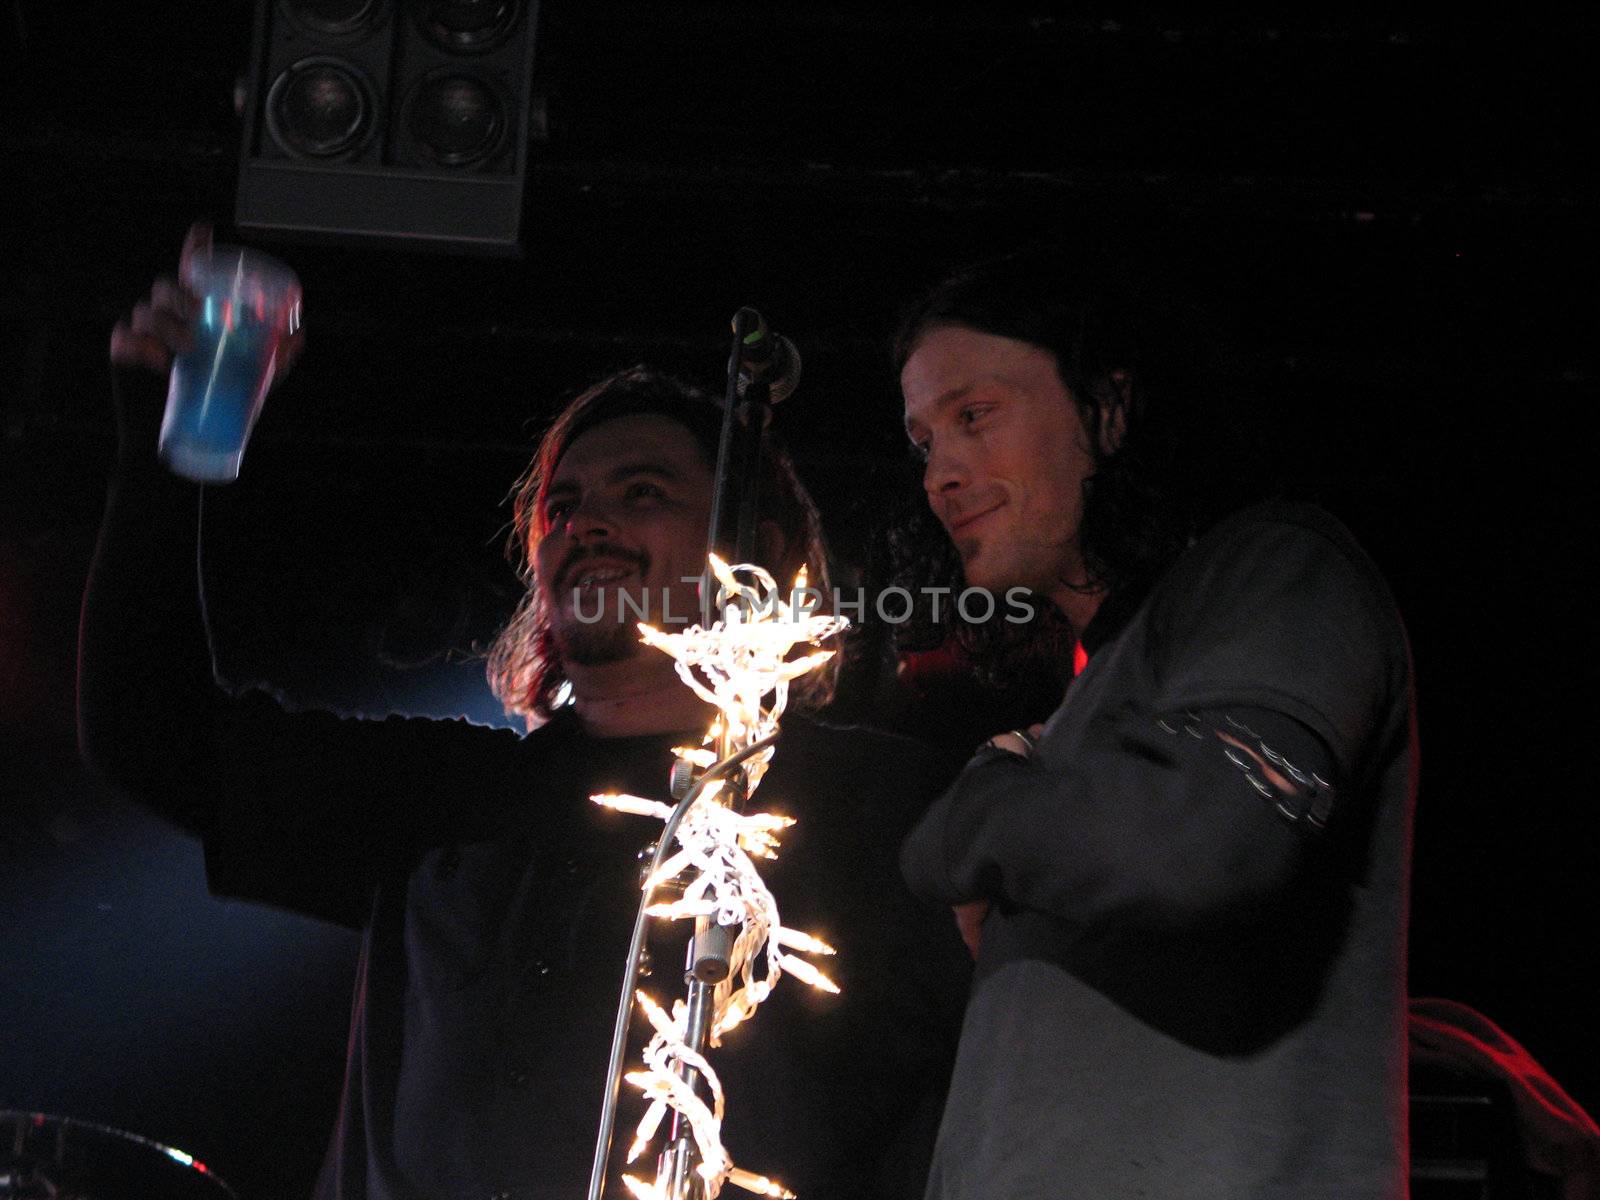 shaun morgan of seether singing a duet with jonny hetherington of art of dying in england